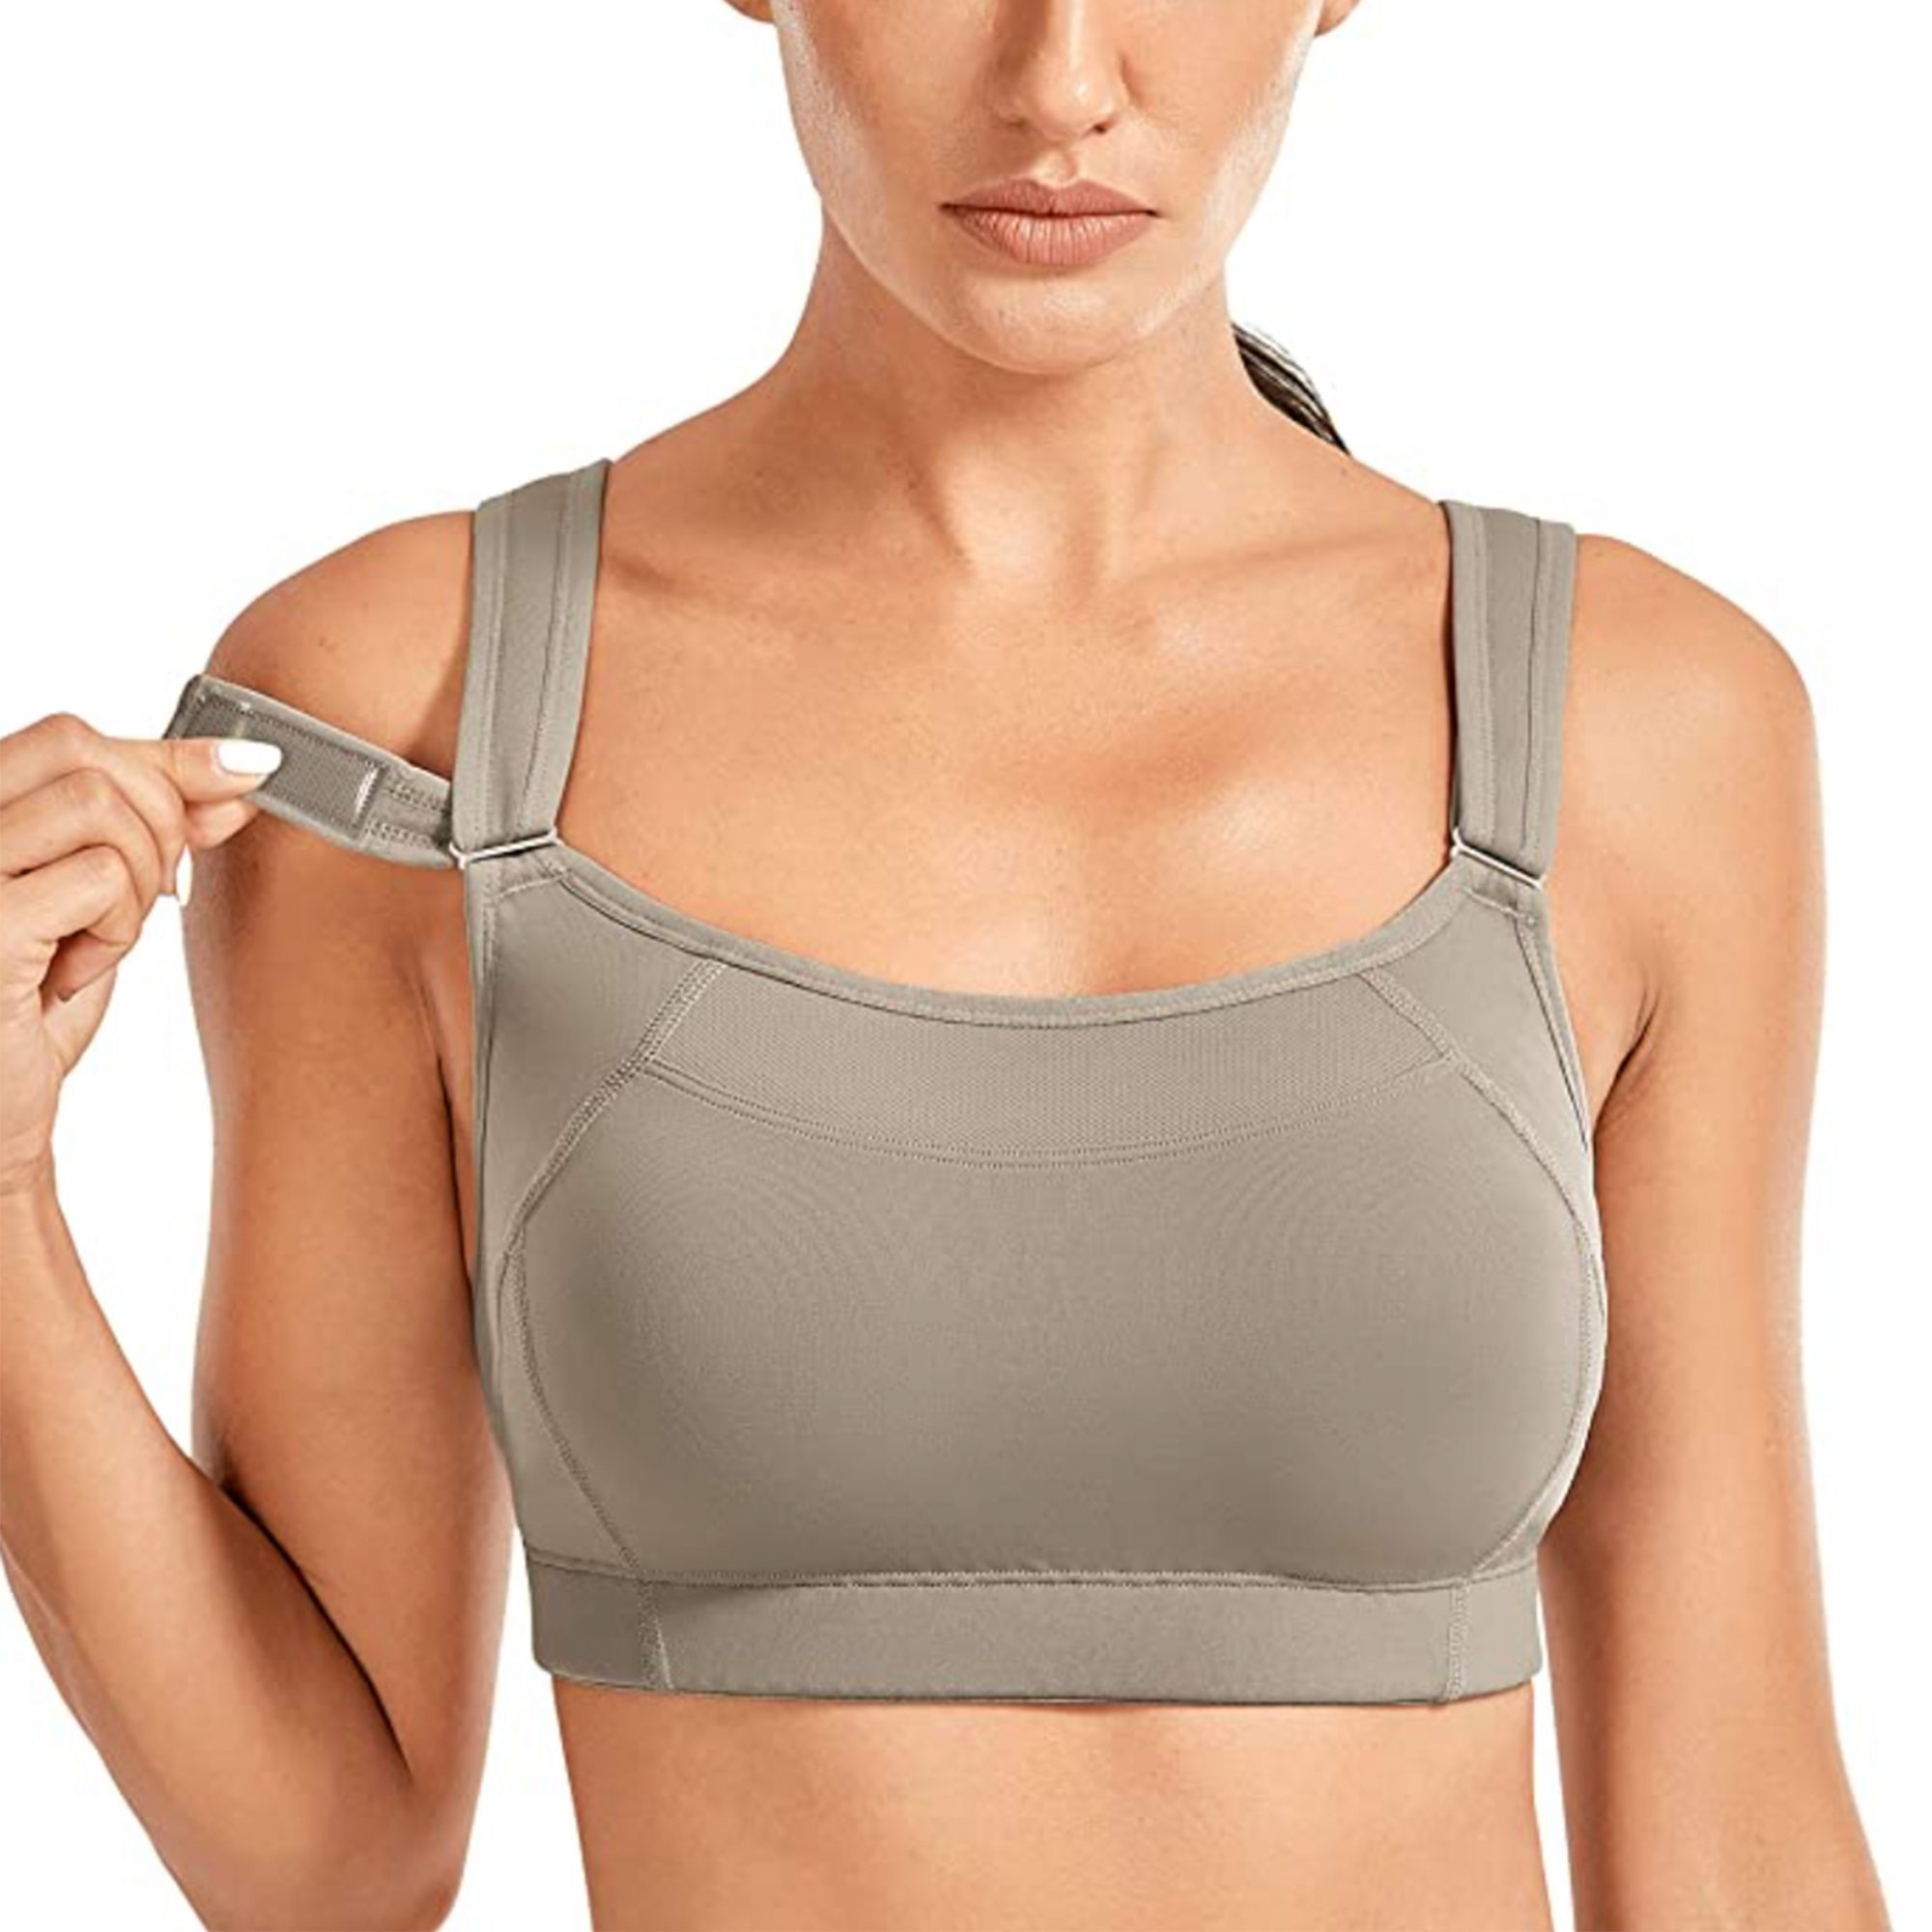 The 12 Best Sports Bras For Women With Big Boobs